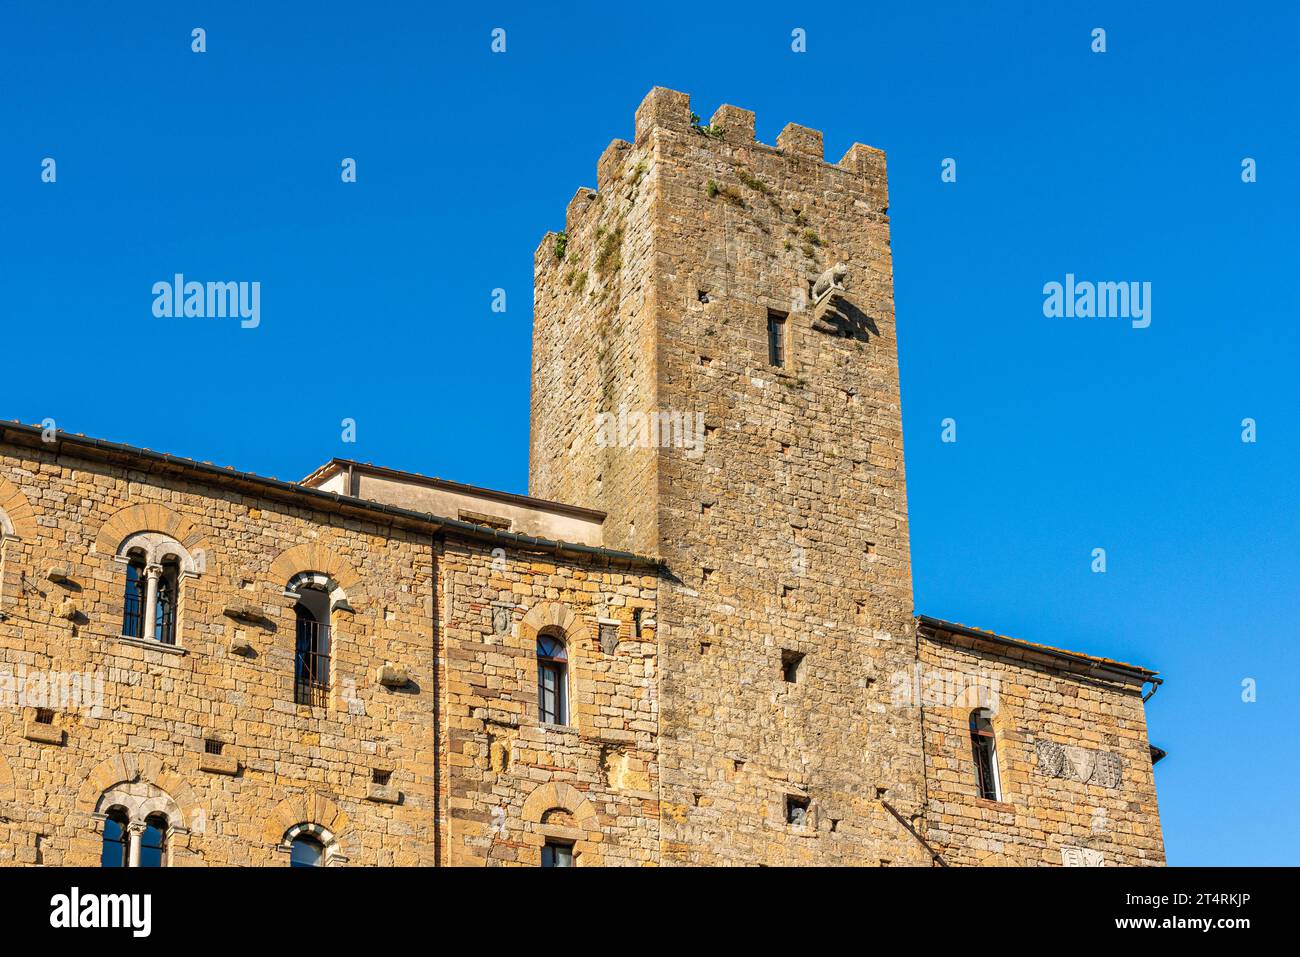 The famous 'Torre del Porcellino' (Pig Tower) in Volterra, in the province of Pisa, Tuscany, Italy. Stock Photo